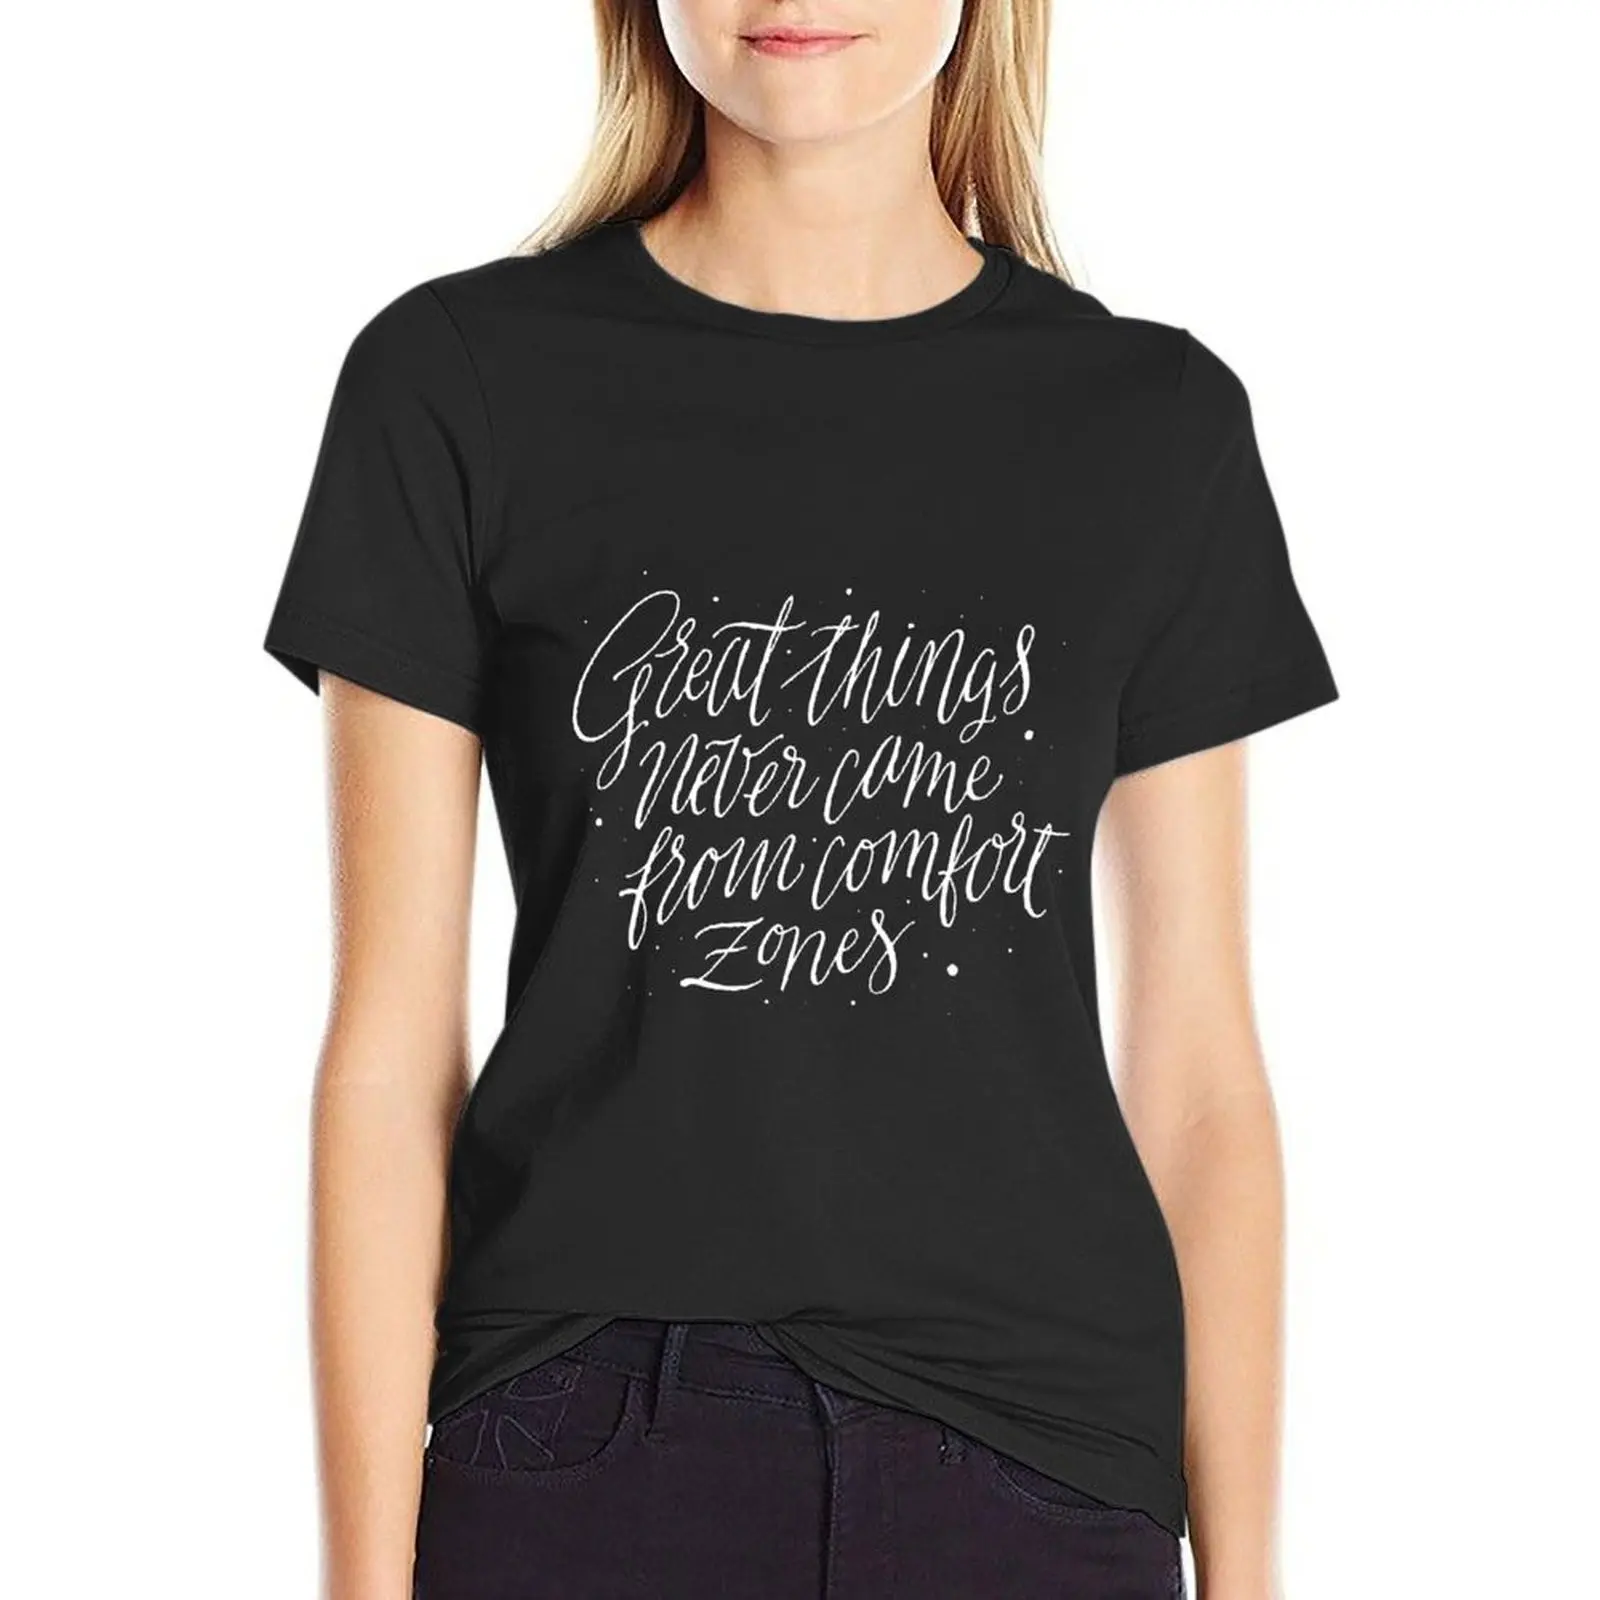 

Great Things Never Came From Comfort Zones T-shirt anime clothes summer clothes cotton t shirts Women